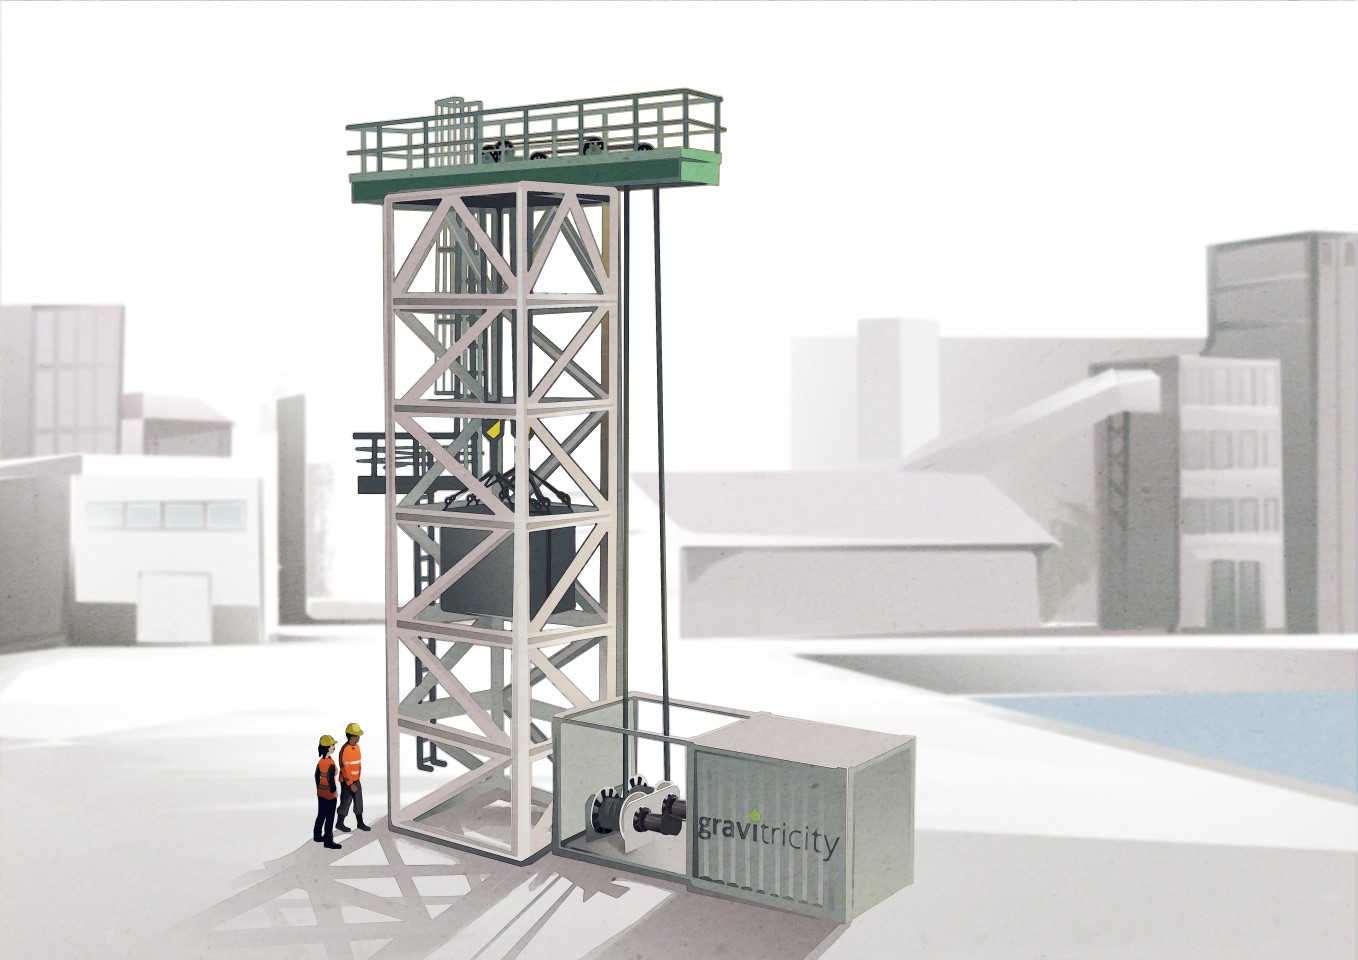 A concept image of the Gravitricity demonstrator facility, which should open for testing in early 2021